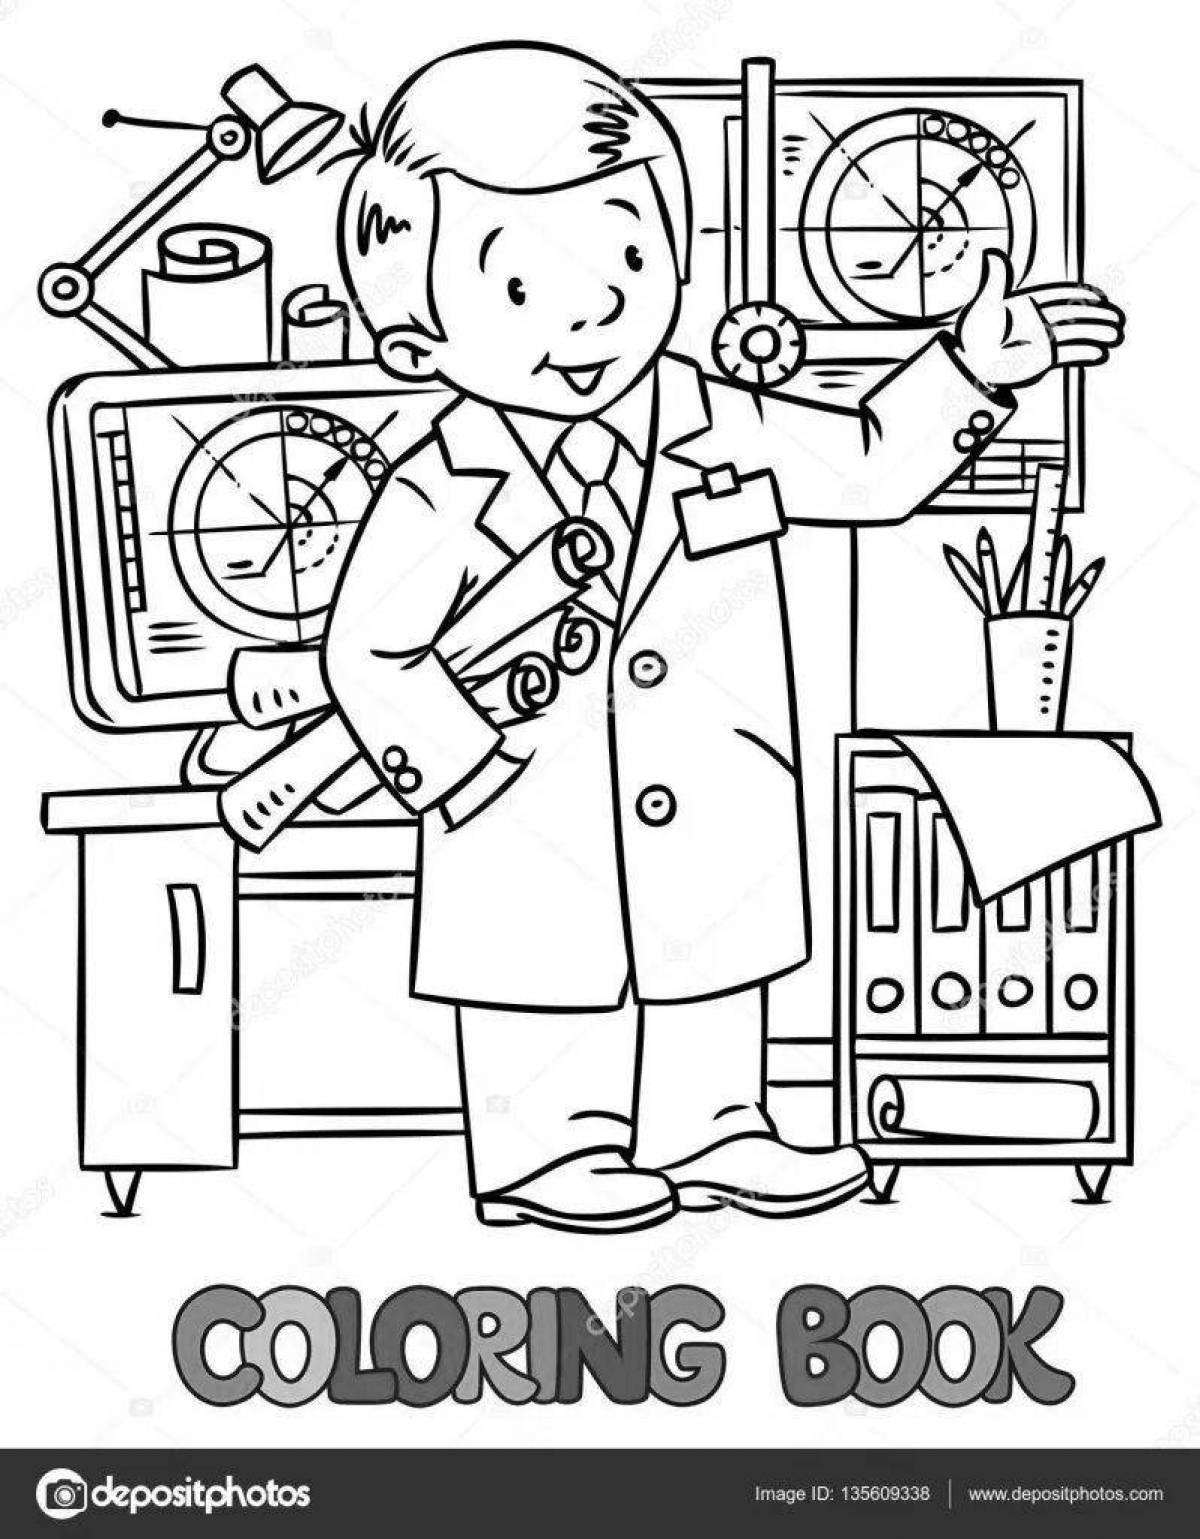 Shining Ecologist coloring page